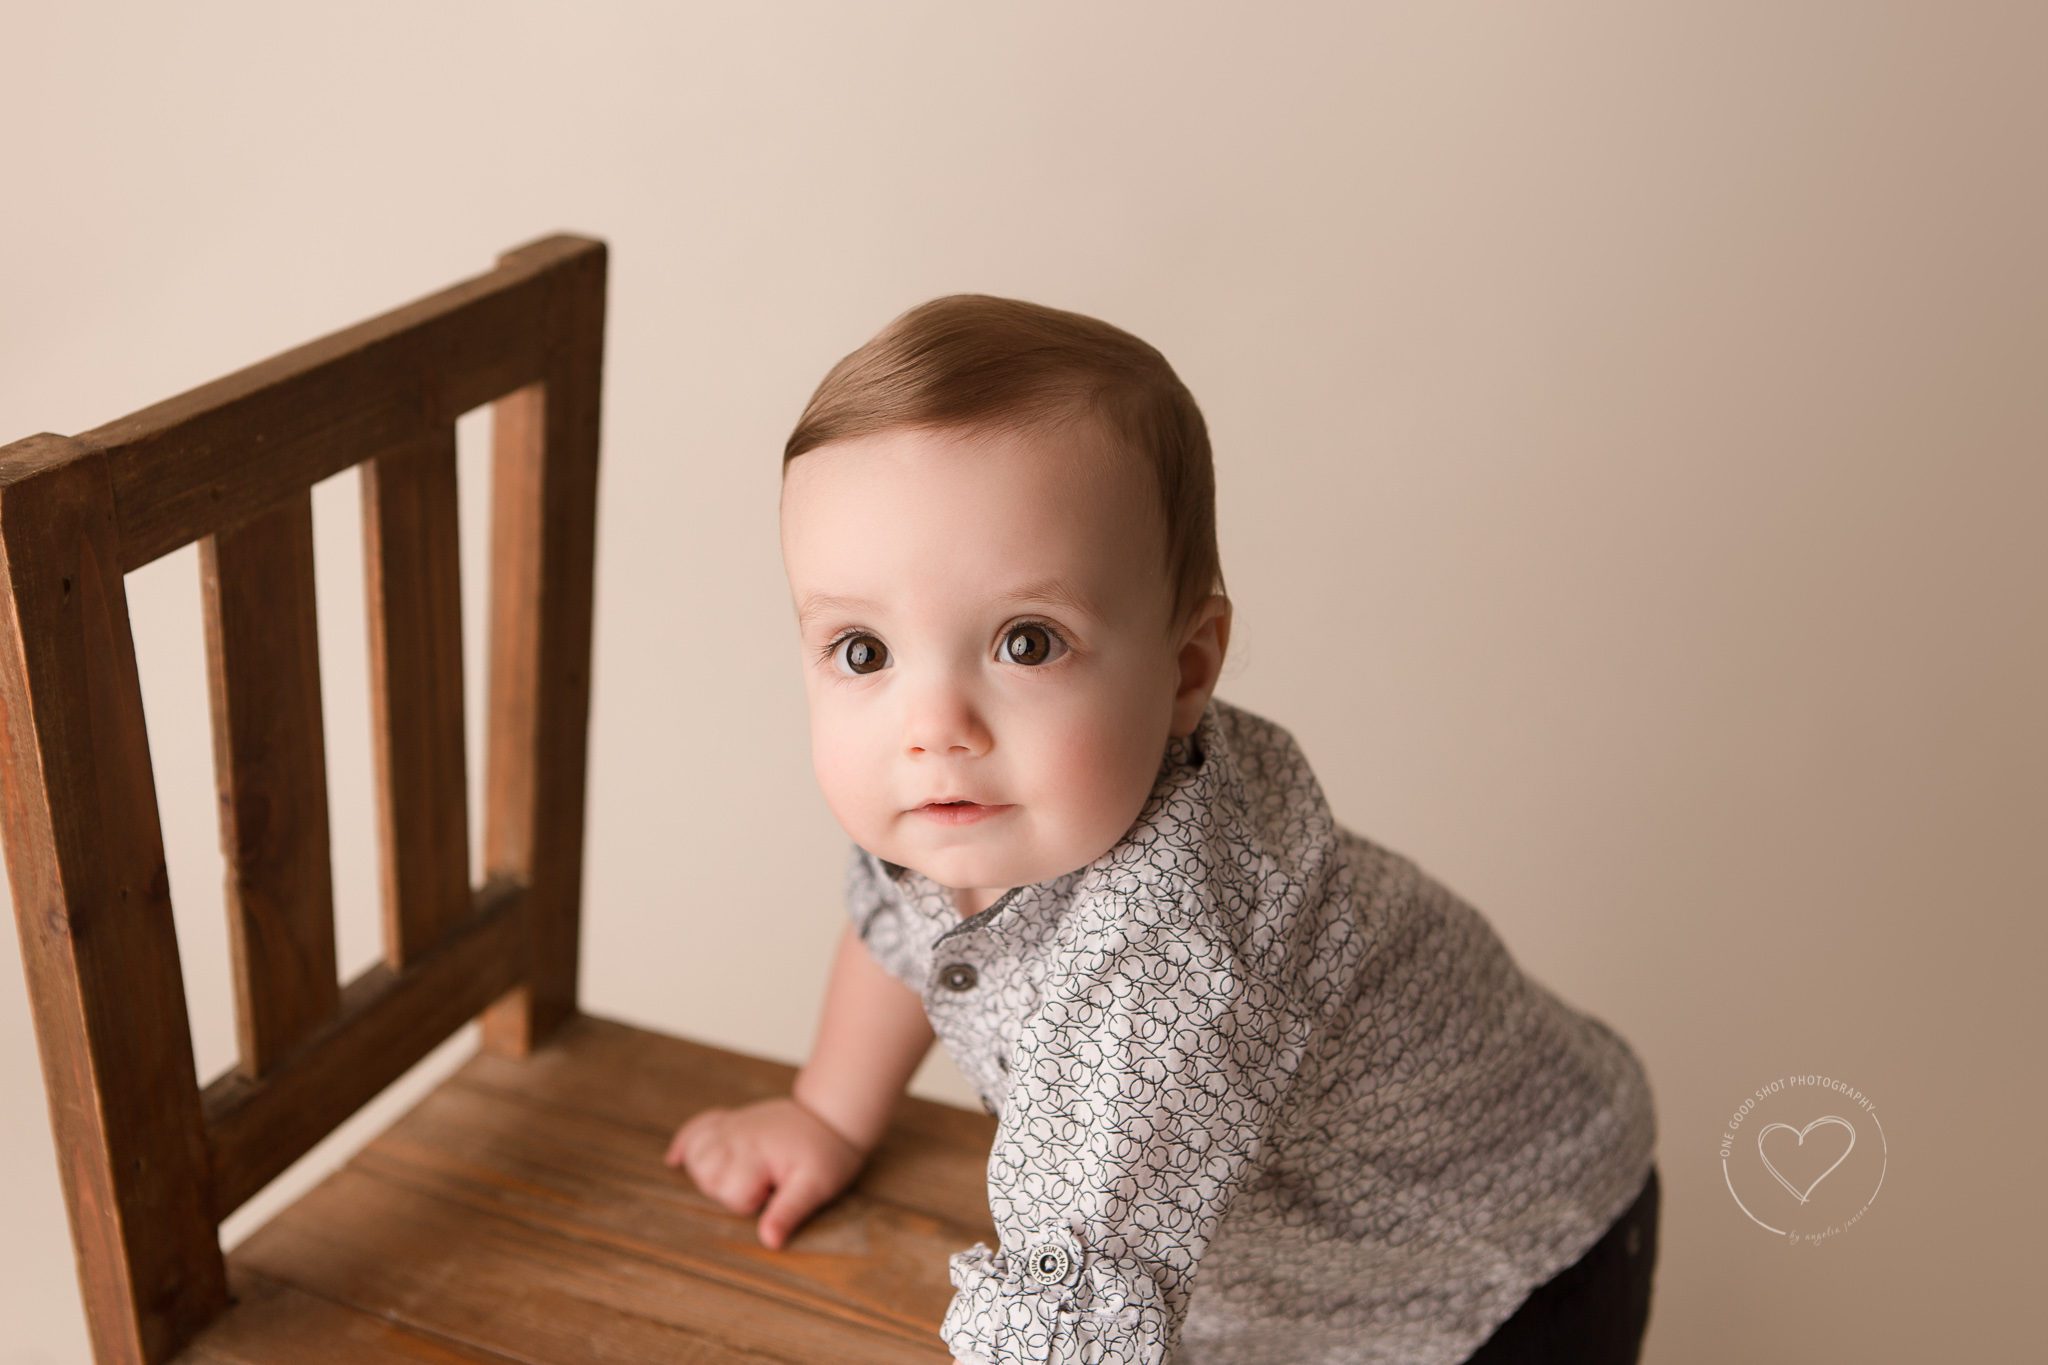 Fresno baby photographer, lboy leaning on brown chair smiling, 9 month old